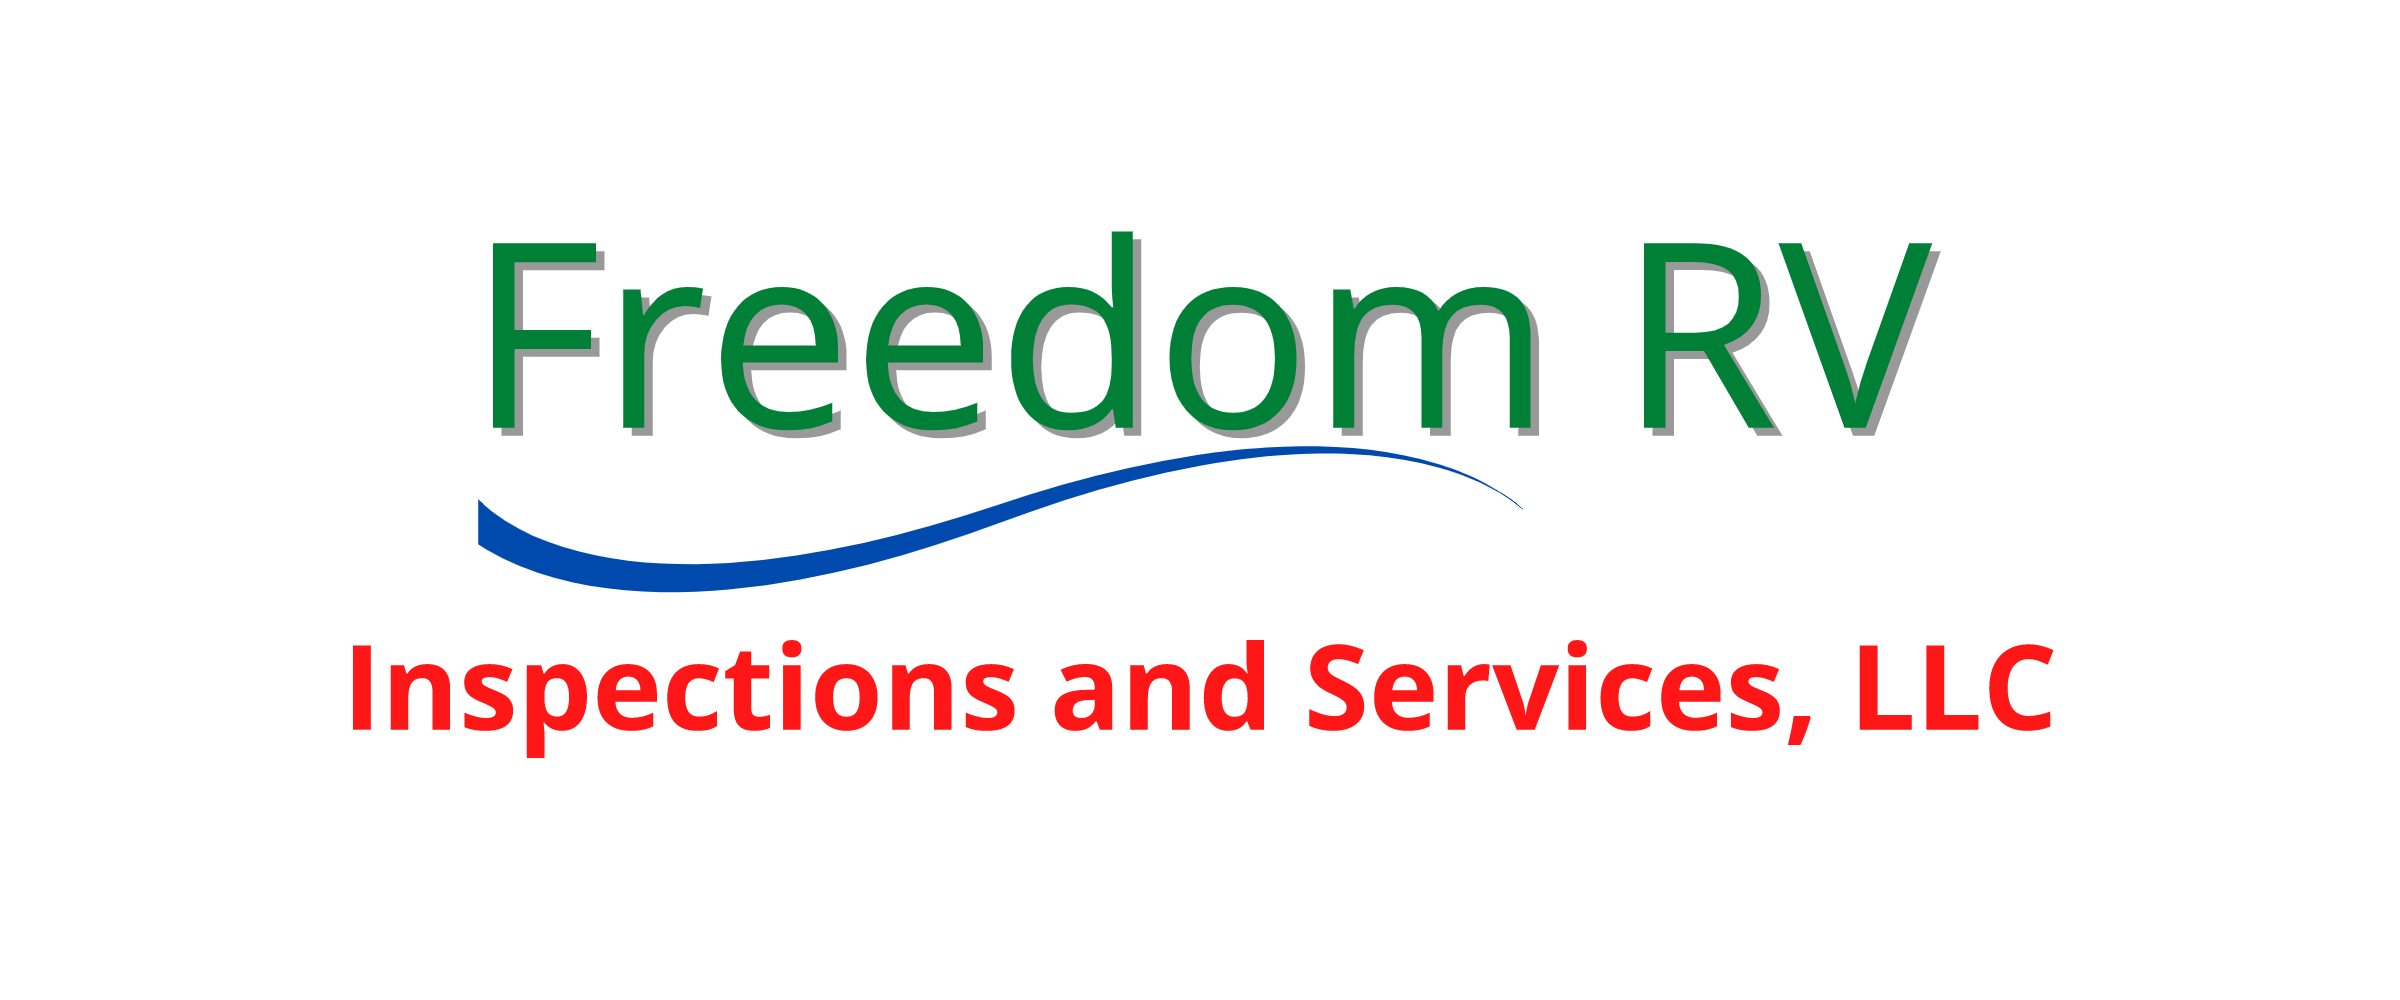 Freedom RV Inspections and Services